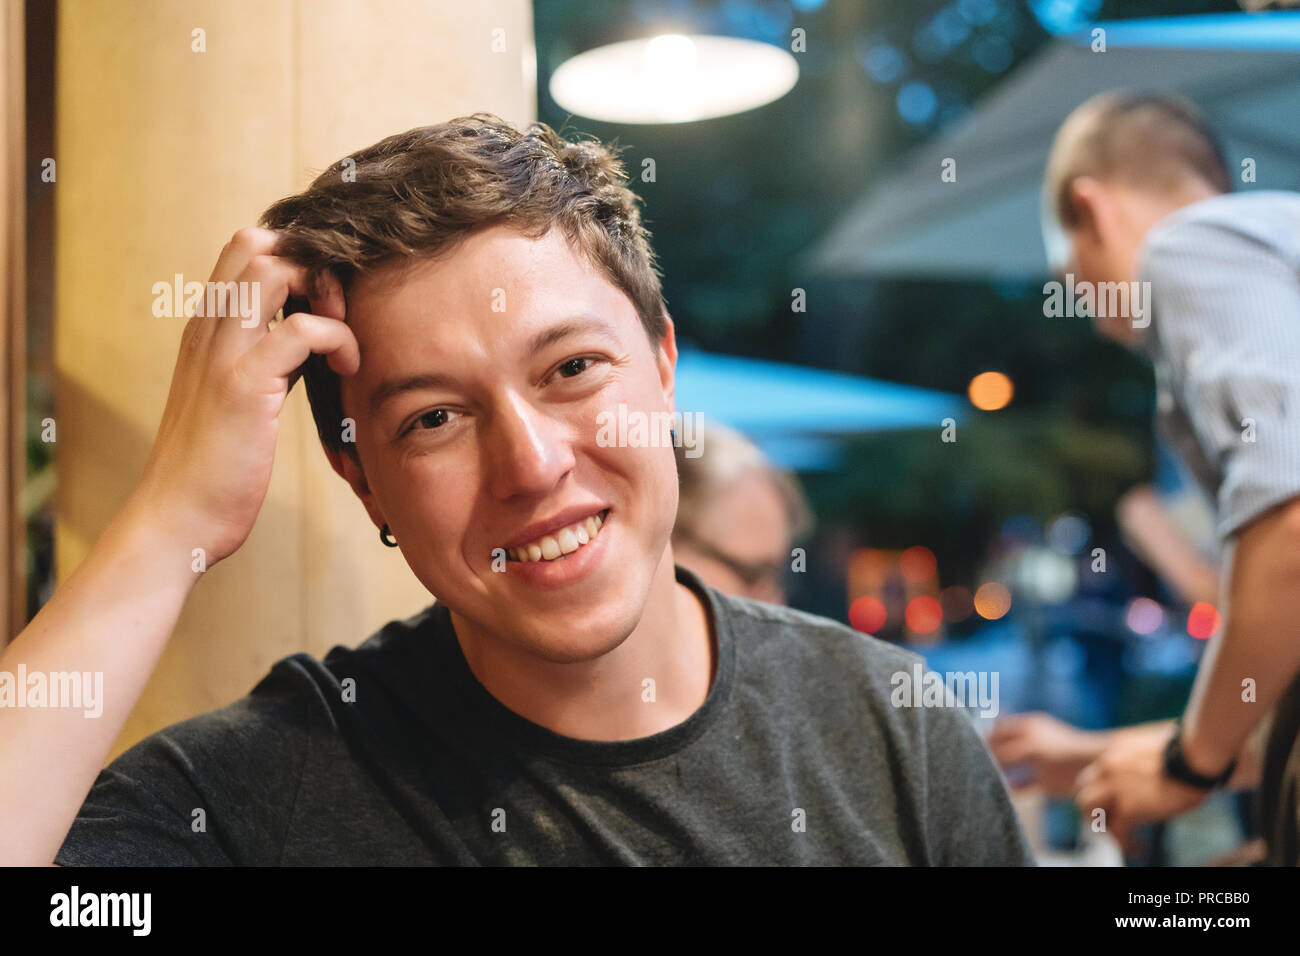 The guy in the evening restaurant. Stock Photo